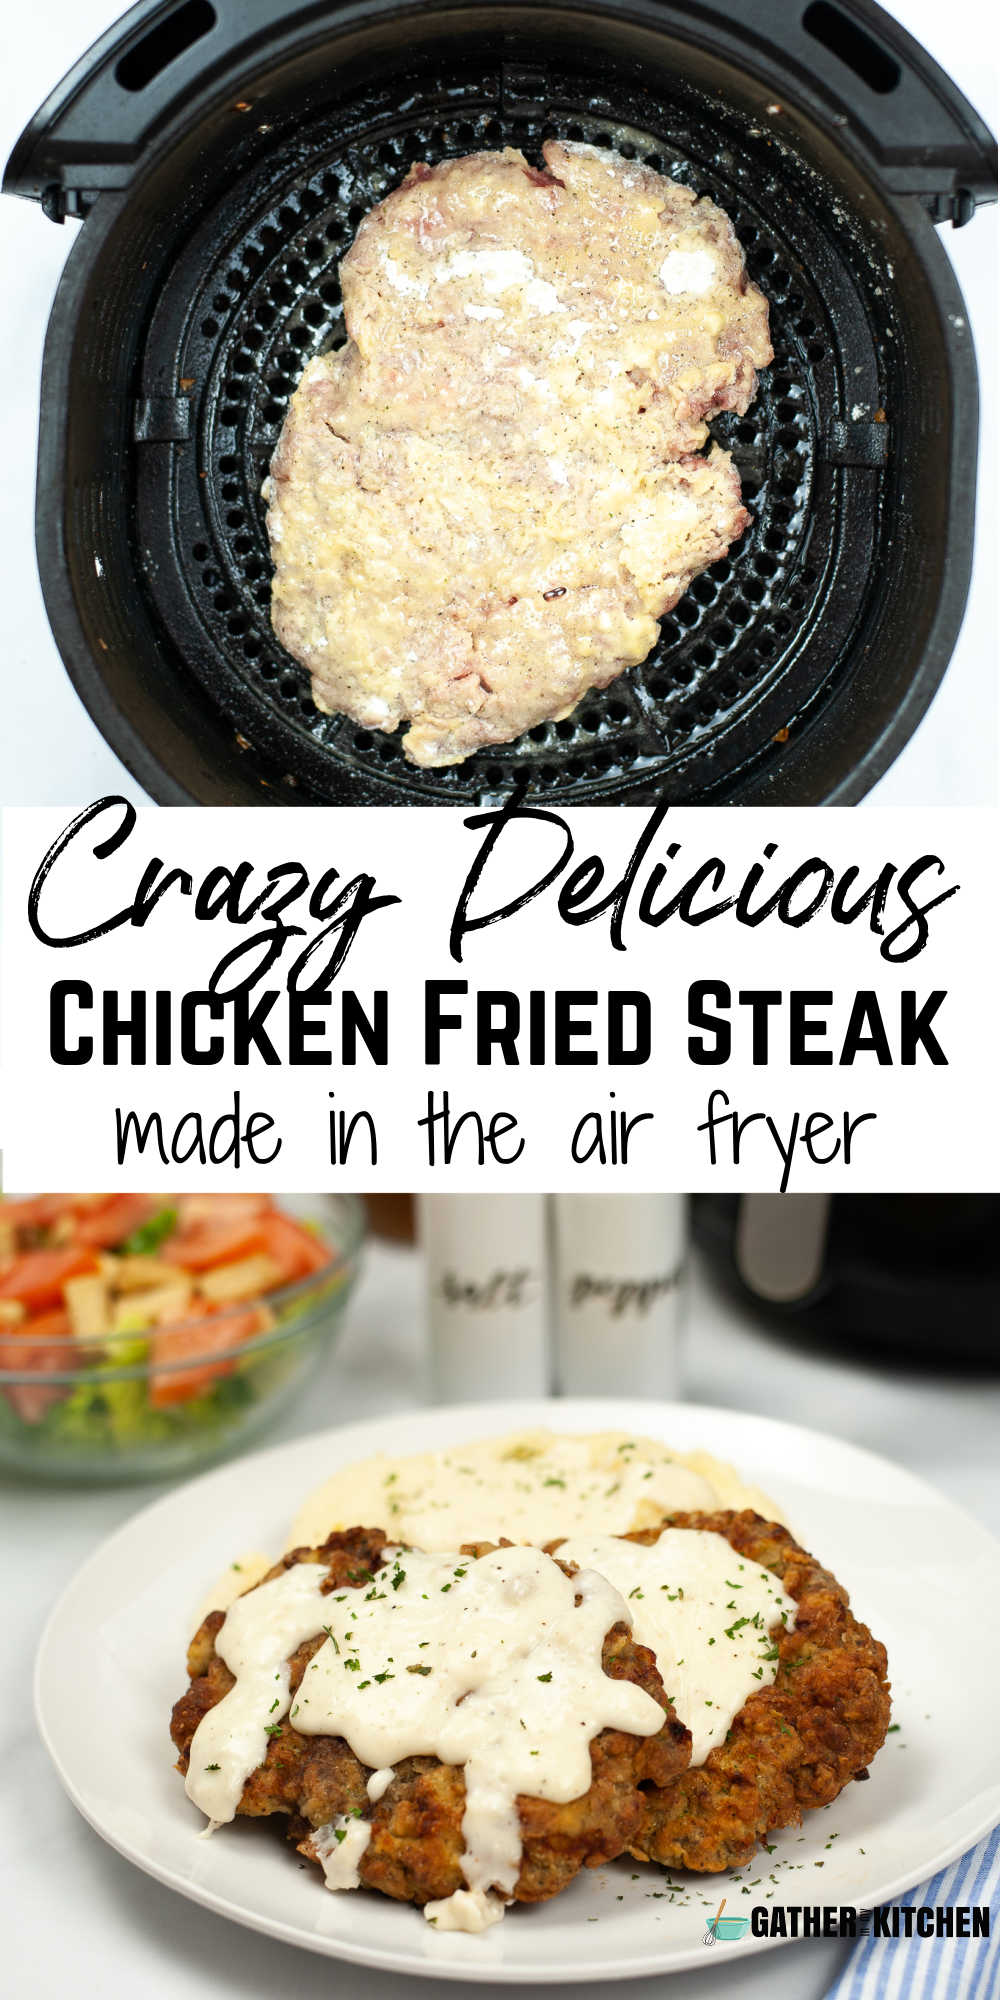 Pin image: top chicken fried steak in air fryer ready to cook, middle says "Crazy delicious chicken fried steak made in the air fryer" bottom is air fried chicken fried steak with gravy on a plate.